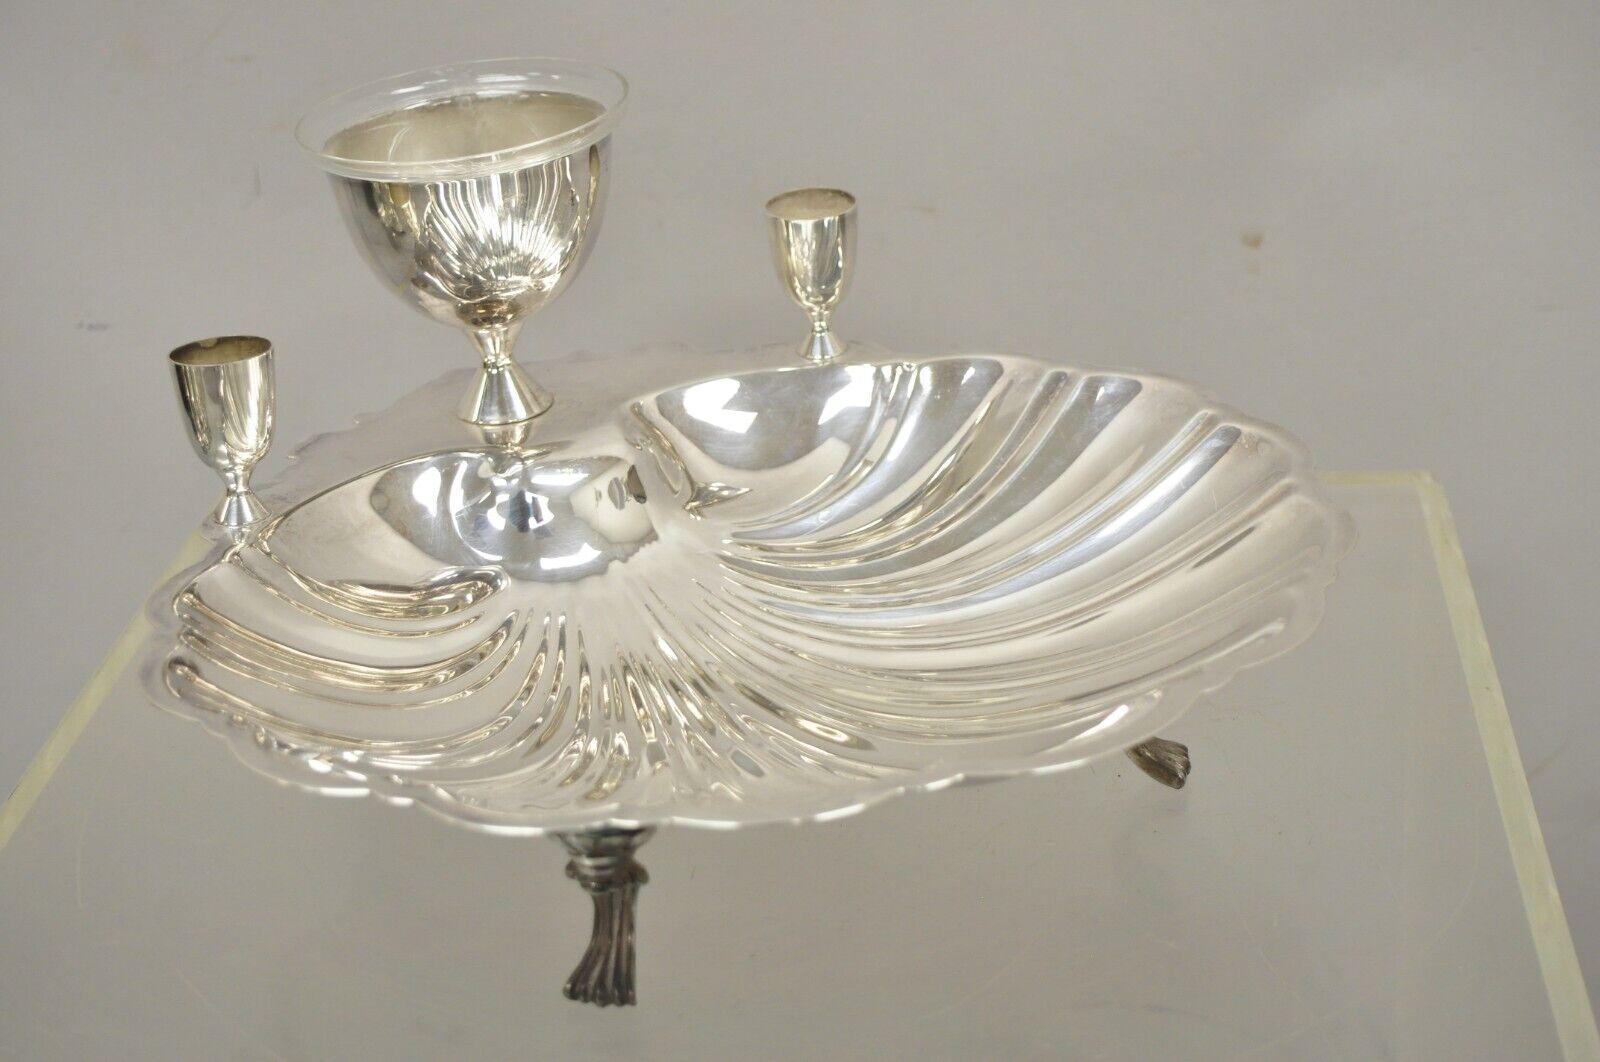 F.B. Rogers Silver Co. 1828 silver plate Regency Style Shrimp & Clam Shell Serving Dish Bowl. Item features removable glass bowl liner, scalloped shell form, raised on feet, original stamp, very nice vintage item, quality craftsmanship. Circa early